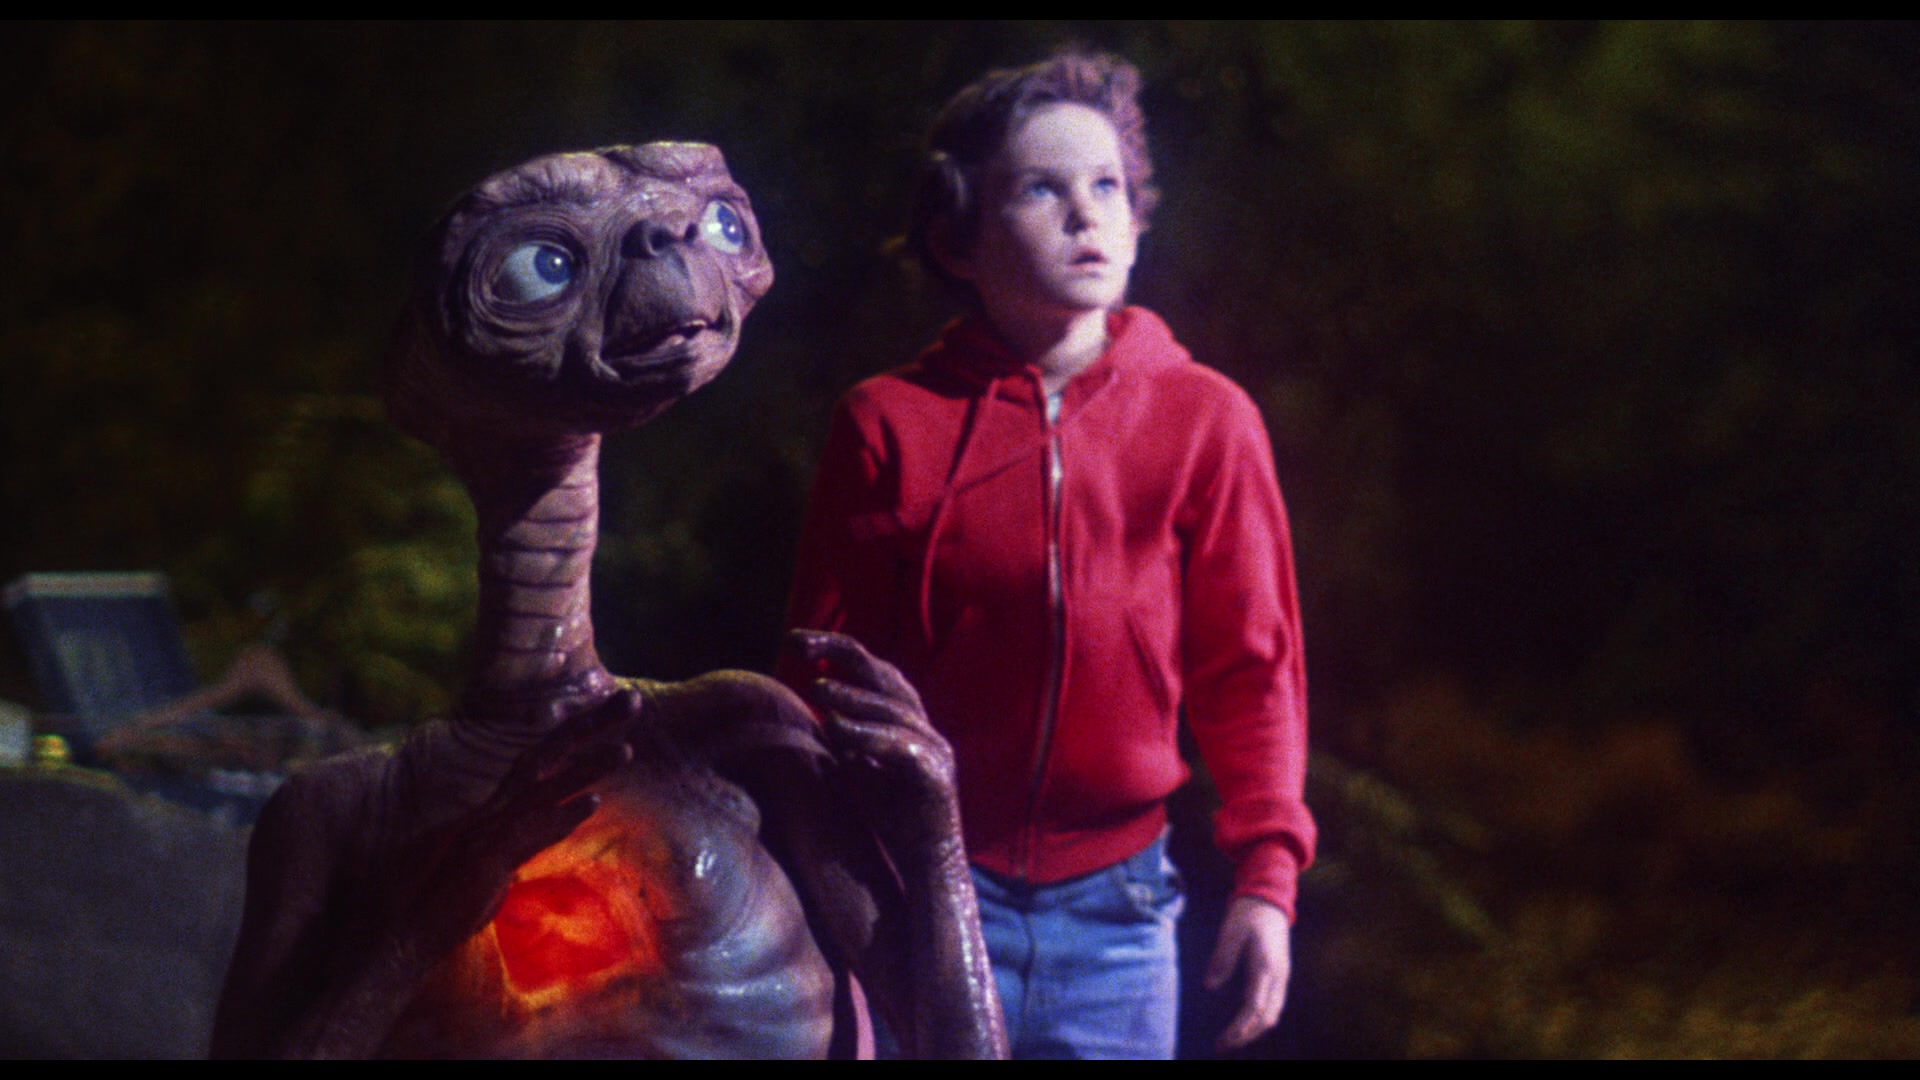 Elliott (Henry Thomas) and E.T. (Pat Welsh/Steven Spielberg/Kayden Green) watch as the mothership approaches in E.T. the Extra-Terrestrial (1982), Universal Pictures